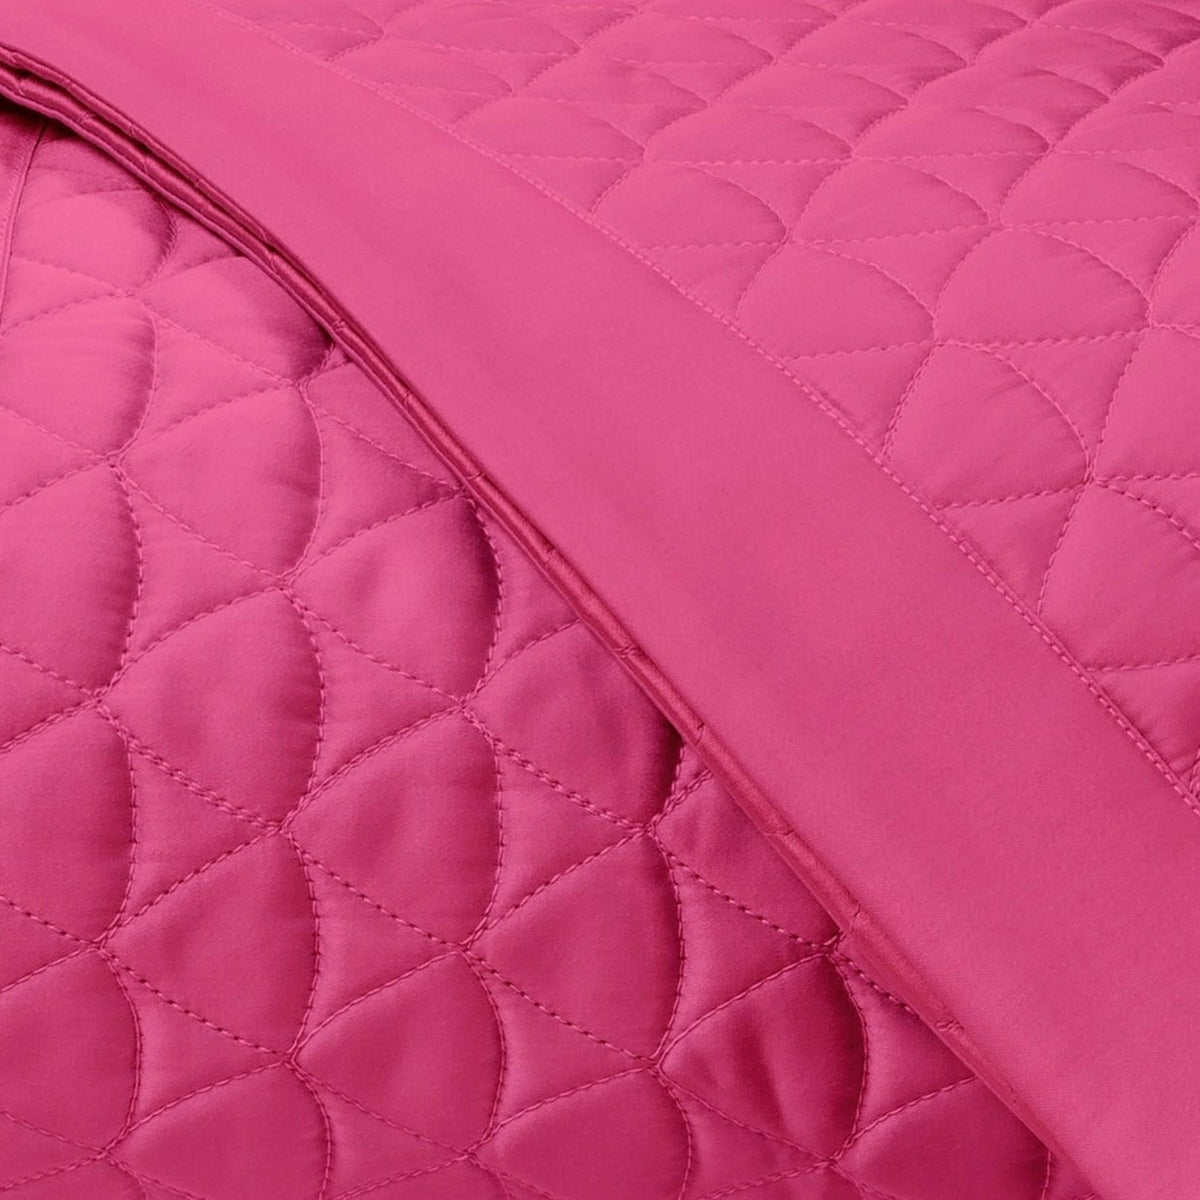 Home Treasures Anastasia Quilted Bedding Fine Linens Swatch Bright Pink